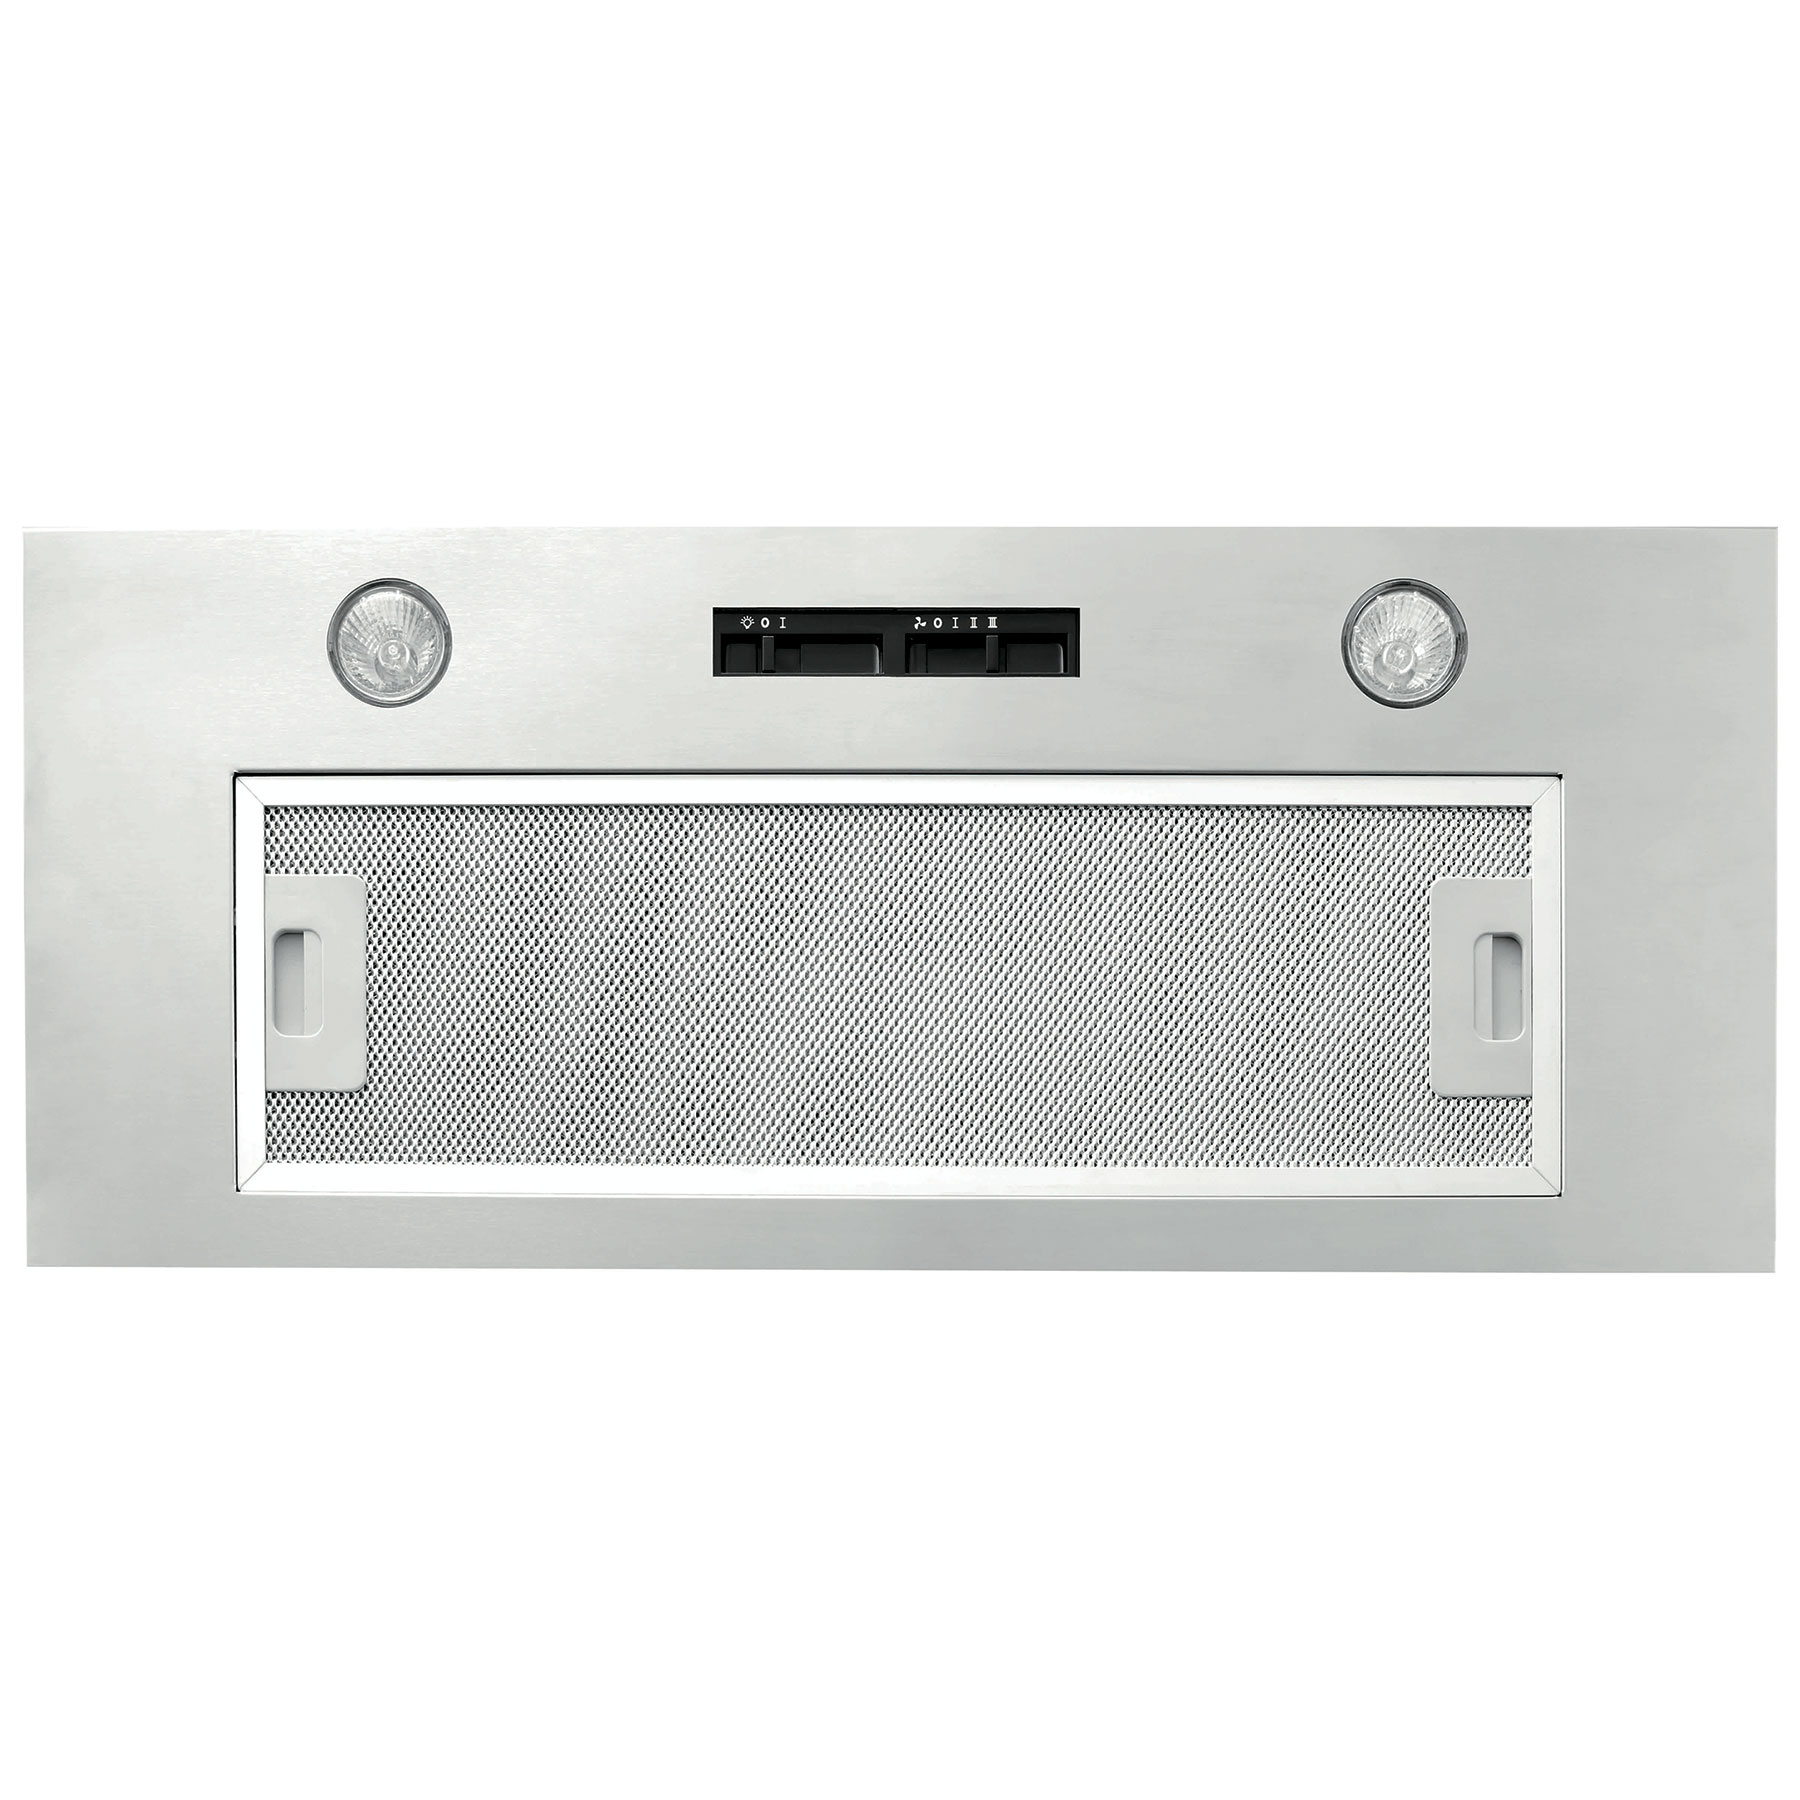 Image of Culina UBCAN70SV 1 70cm Canopy Extractor Hood in Silver 3 Speed Fan